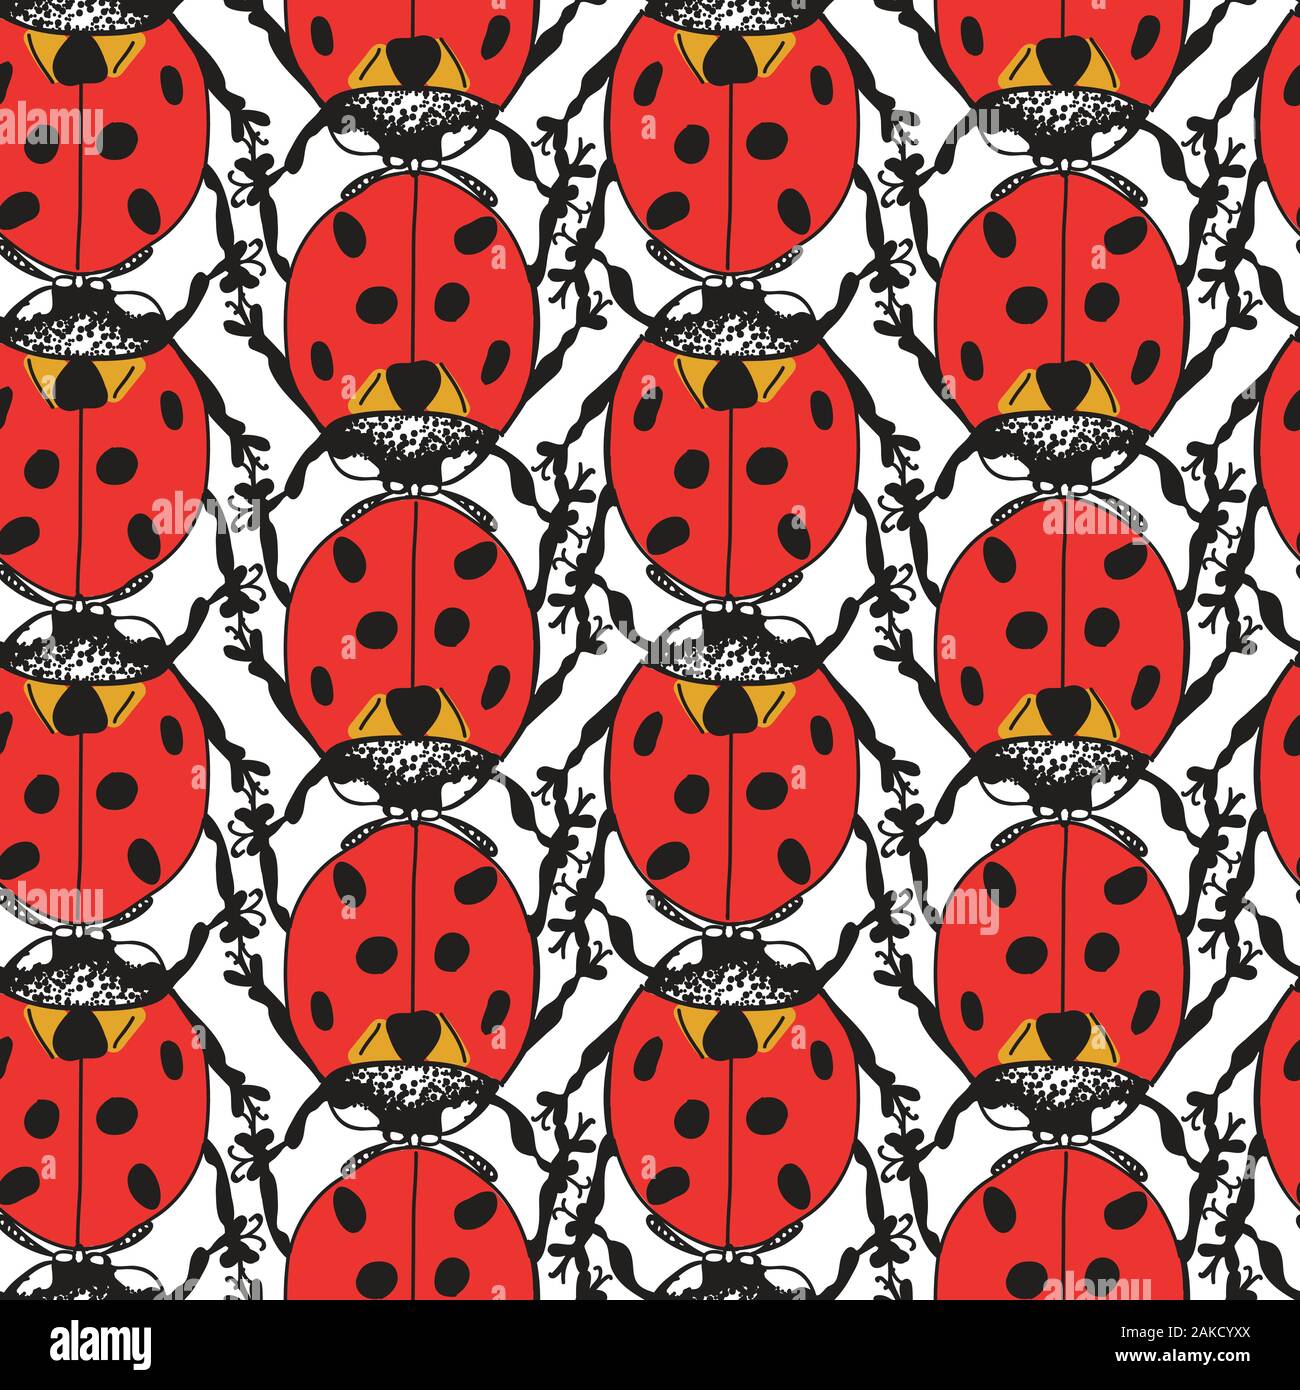 Bright Red Ladybug Beetle Coccinellidae Design Seamless Pattern on White Background Stock Vector